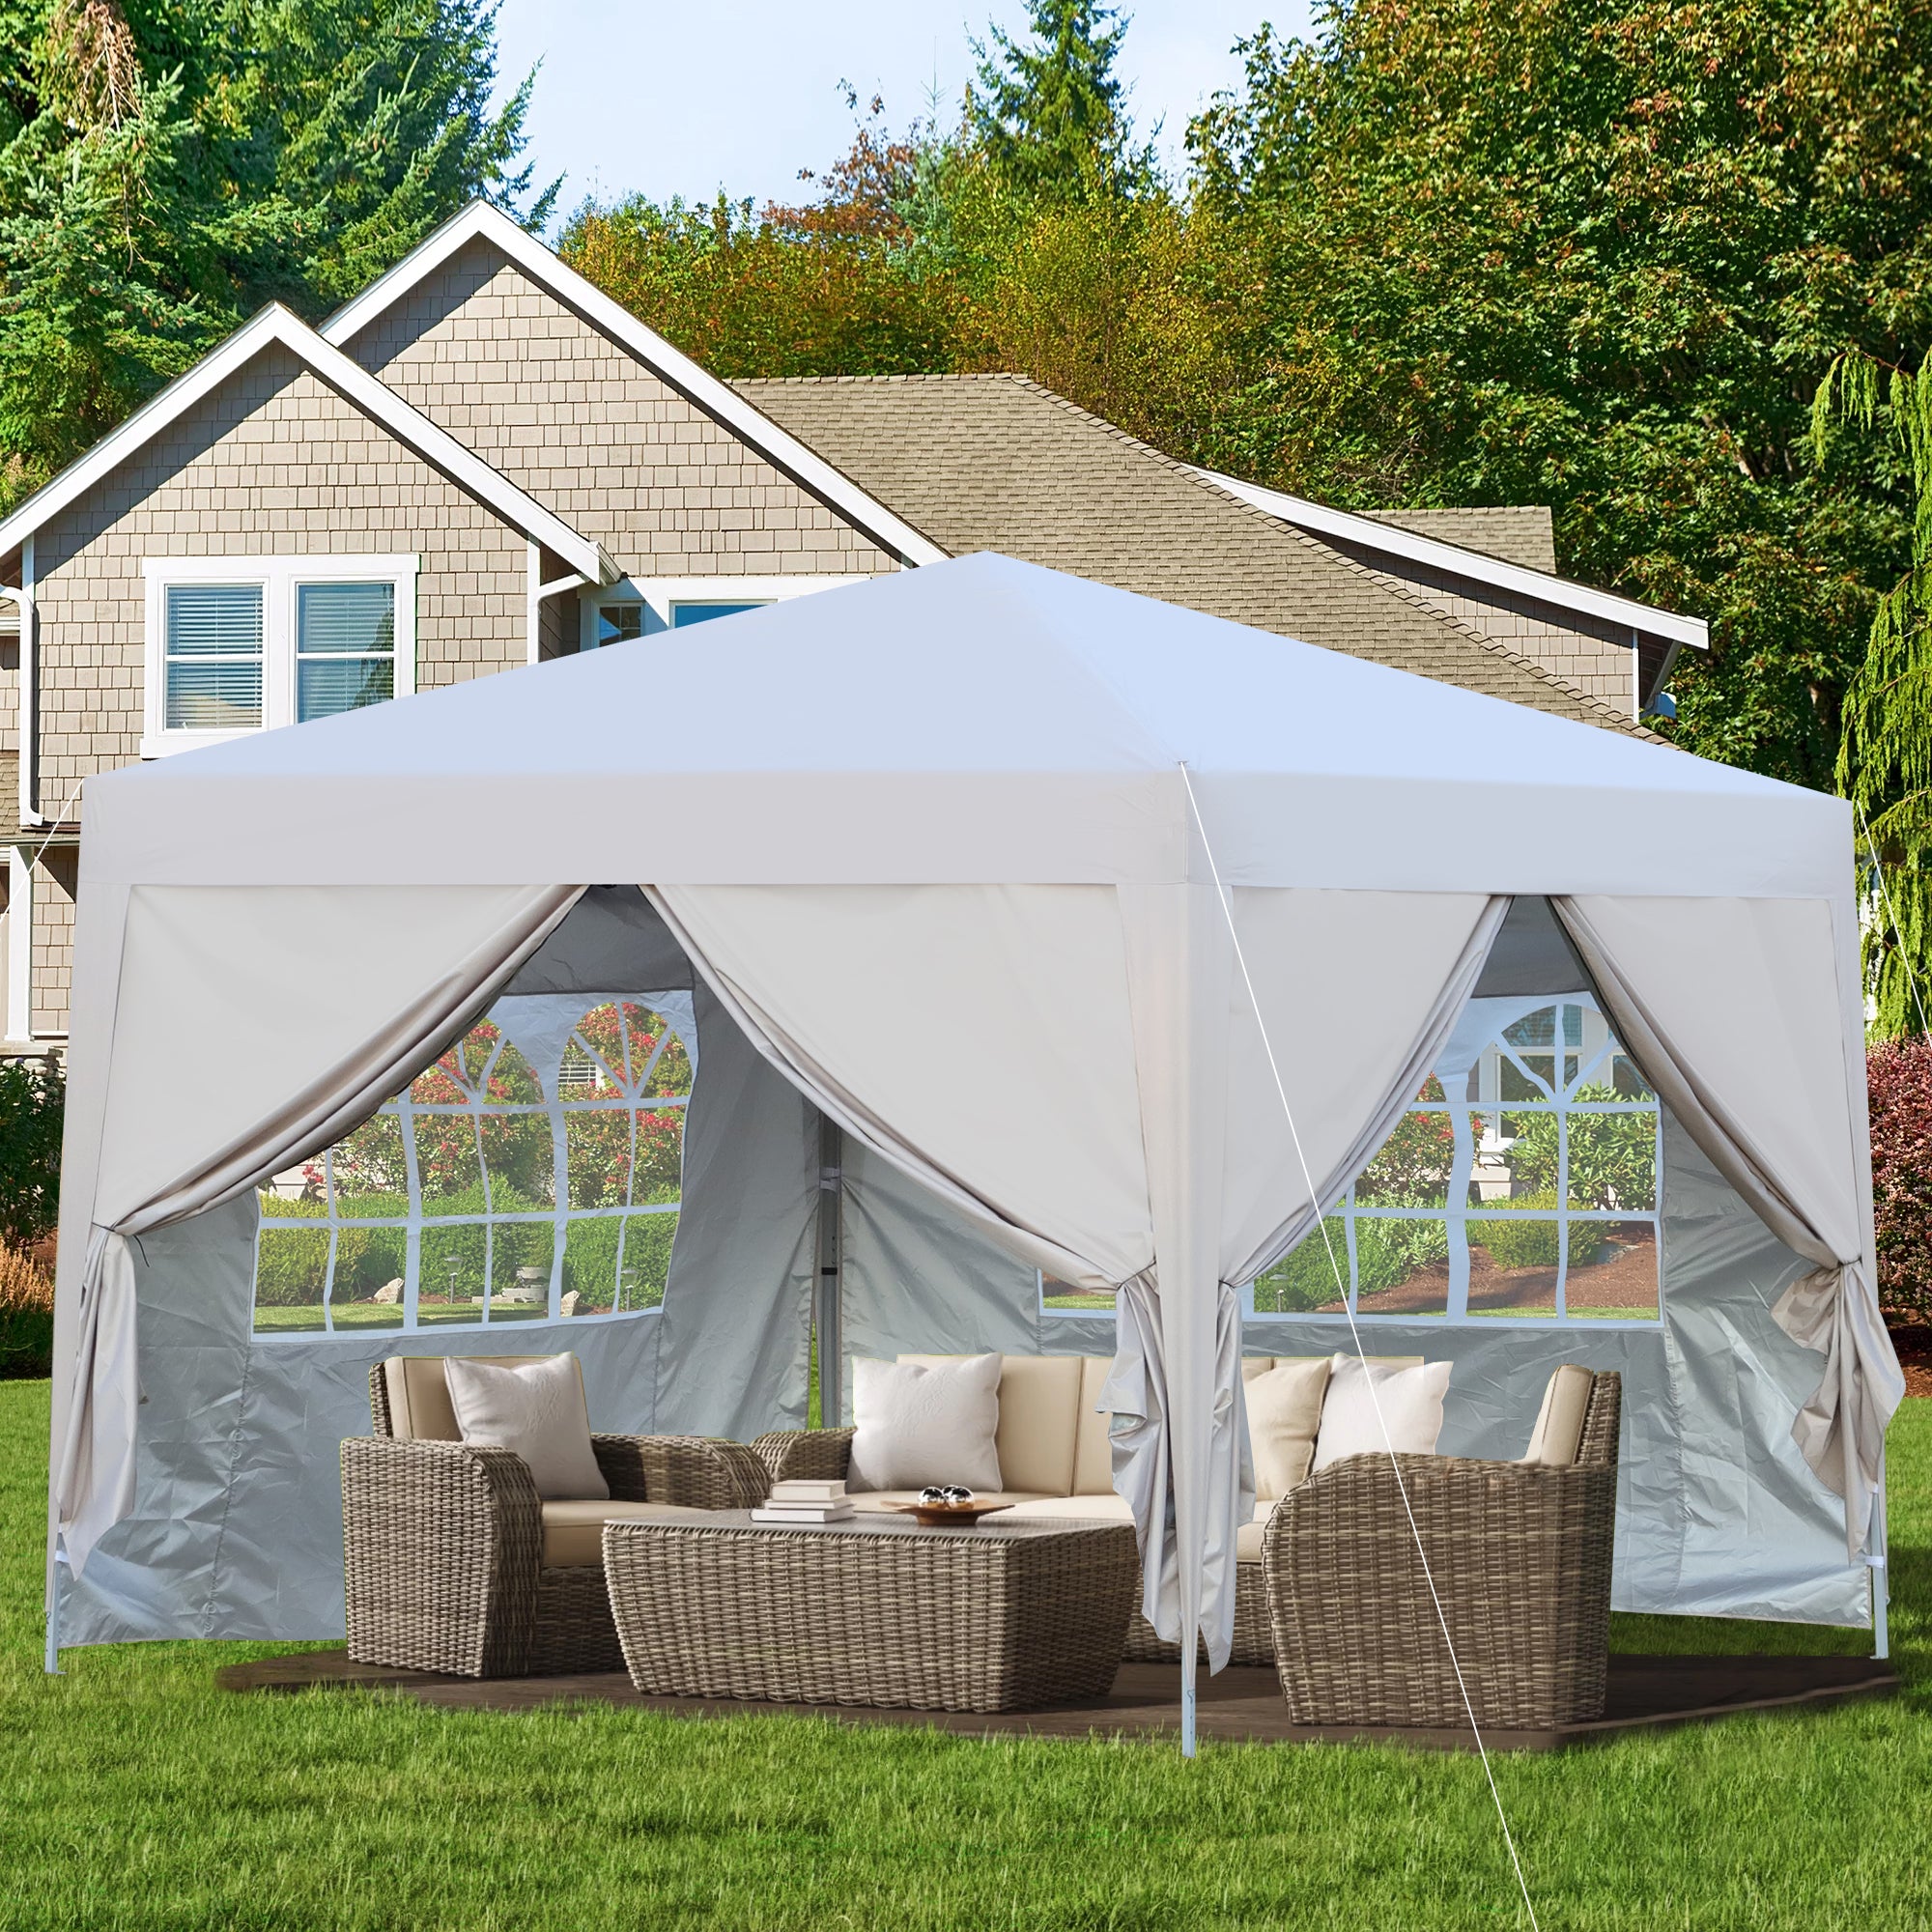 Outdoor 10x 10Ft Pop Up Gazebo Canopy Tent Removable beige-metal